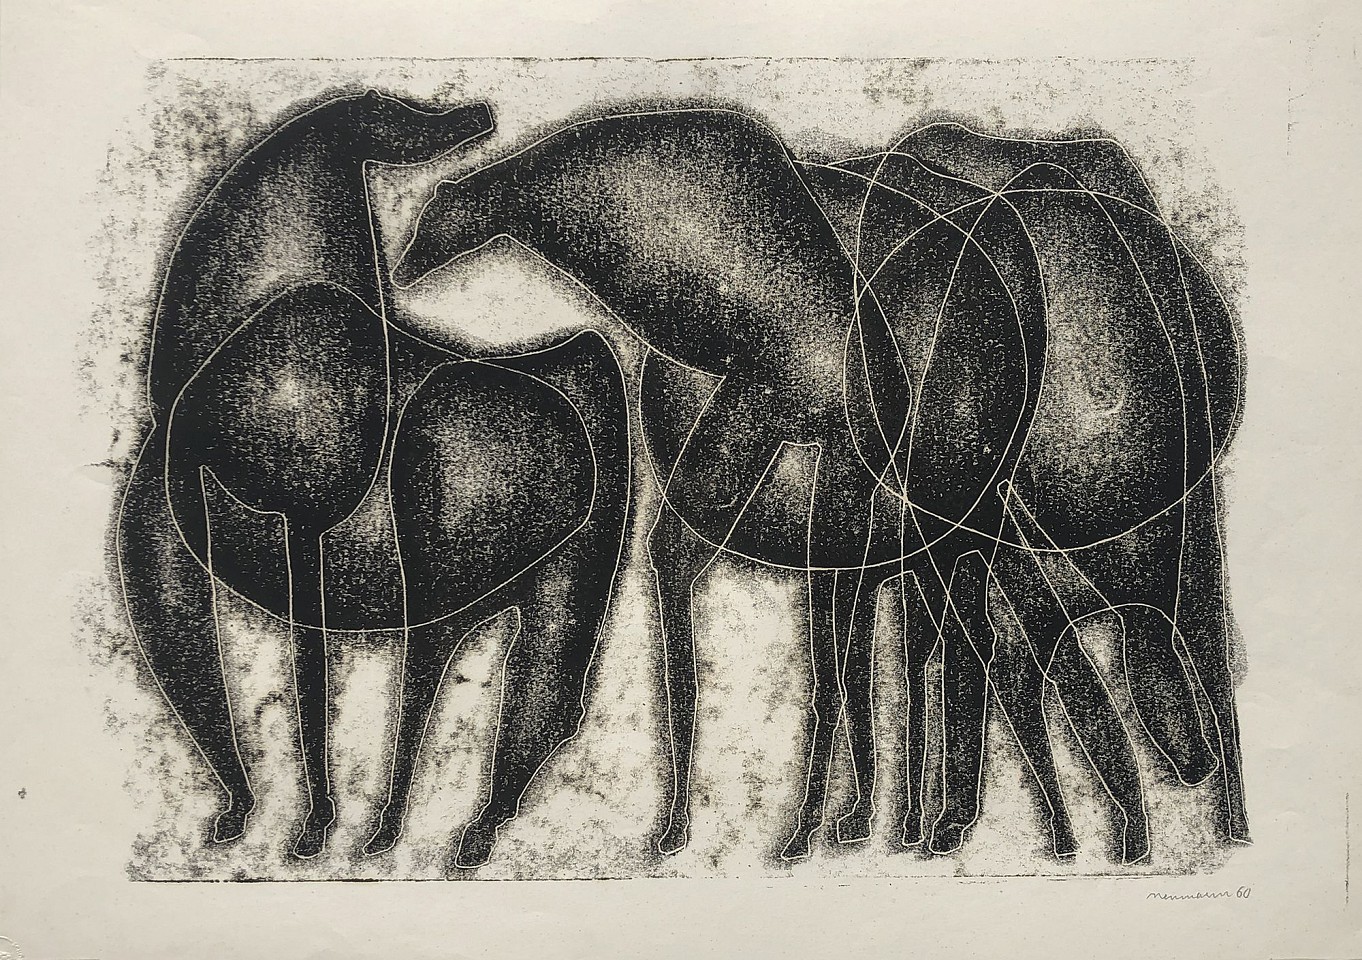 Otto Neumann 1895-1975, Abstract Horses, 1960
monotype on paper, 17.625" x 24.625",26" x 33" framed 
OT 045014
$9,700